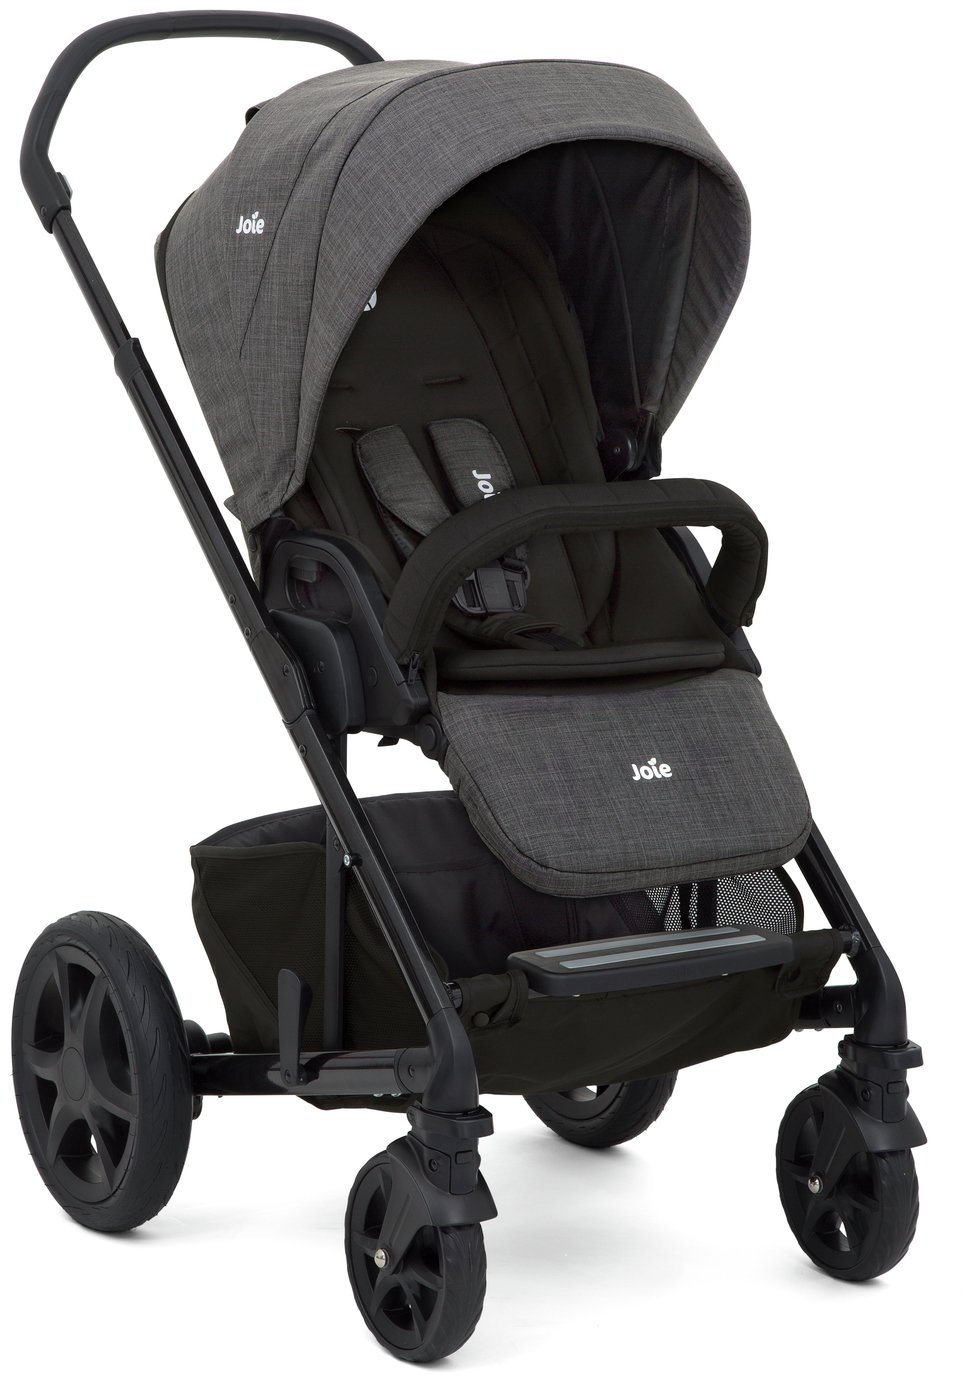 joie pushchair and carrycot